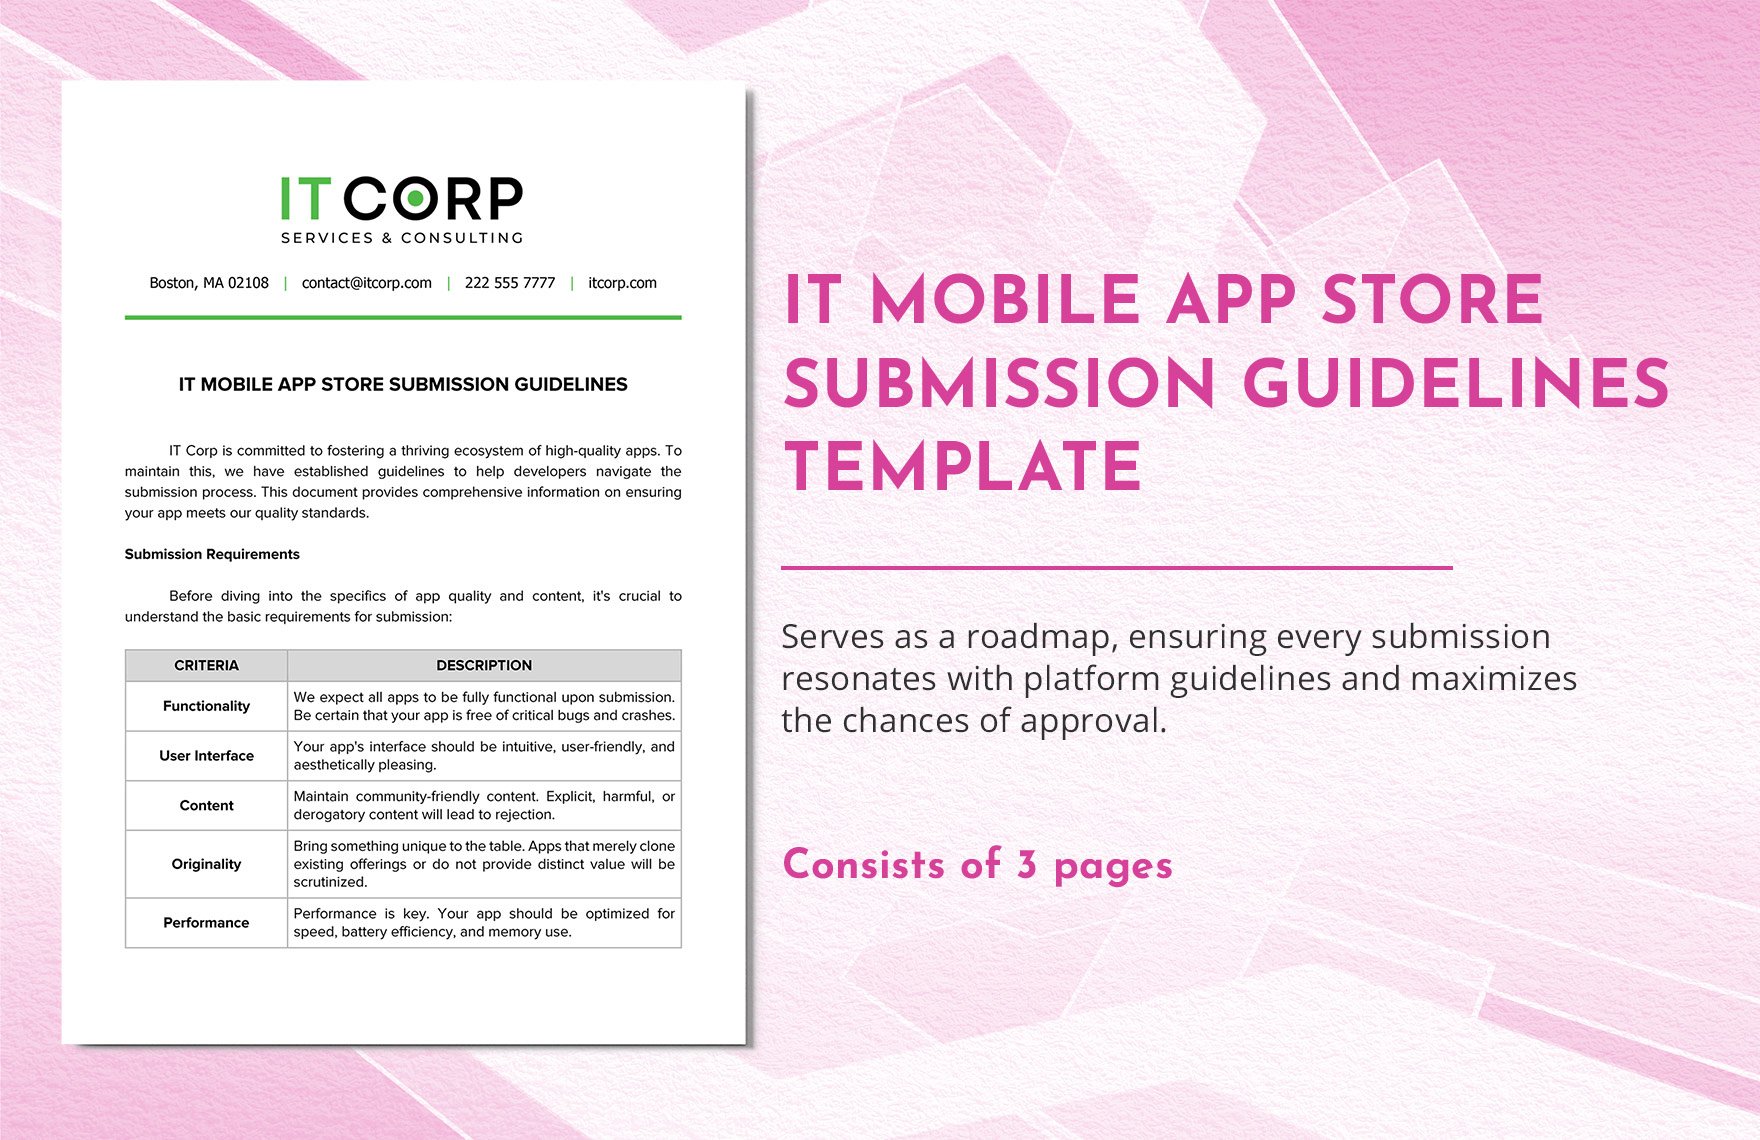 IT Mobile App Store Submission Guidelines Template